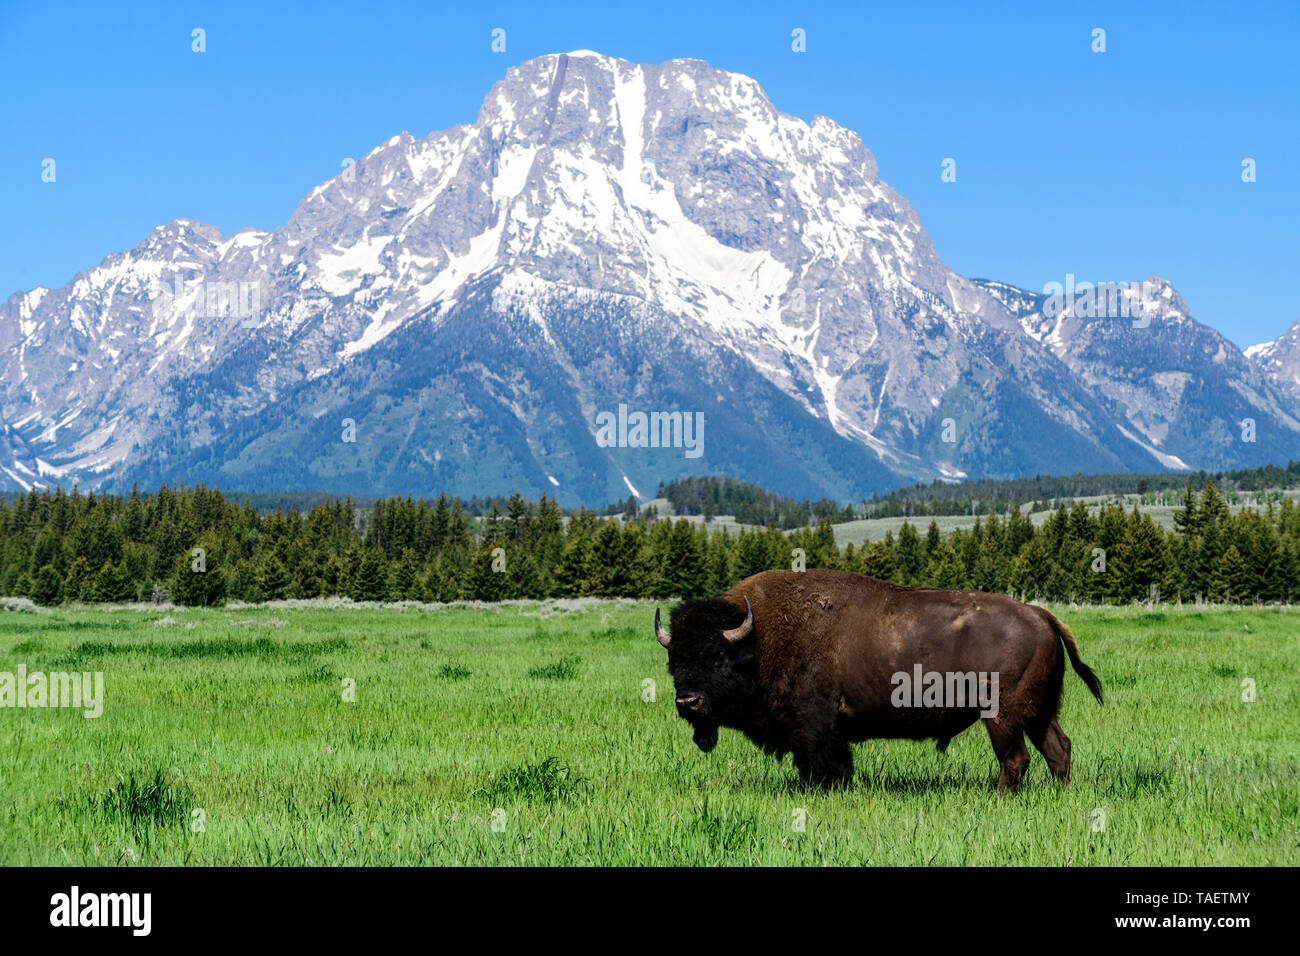 A bison in a field with Mt. Moran in the background in Grand Teton National Park near Jackson Hole, Wyoming USA. Stock Photo